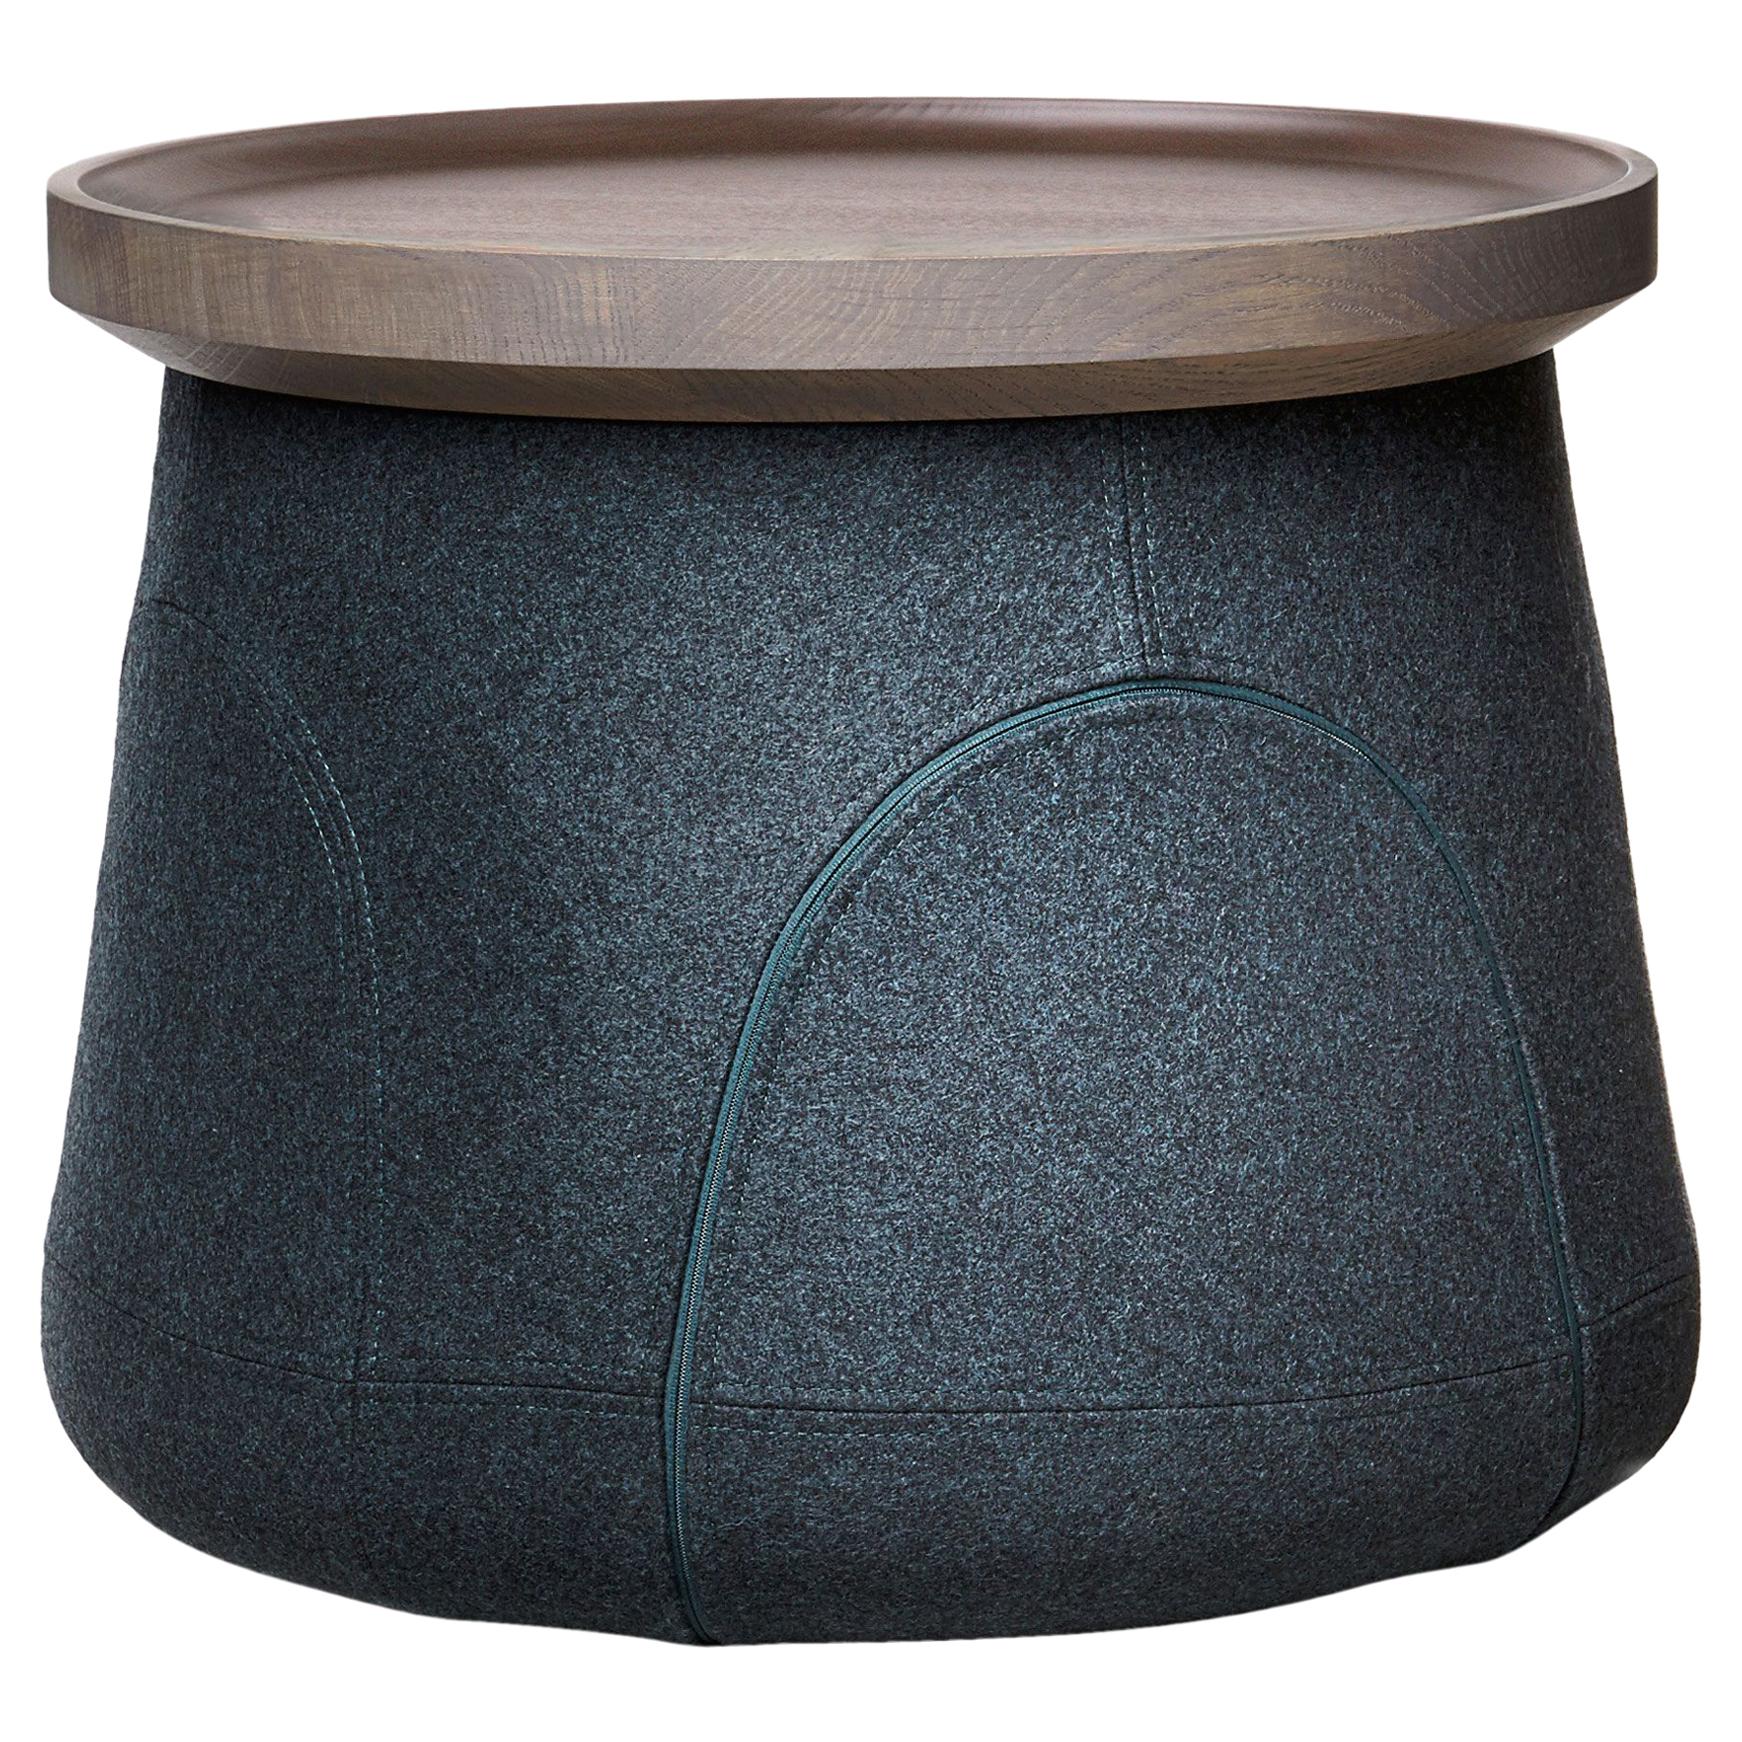 Elements 006 Table/Pouf by Moooi